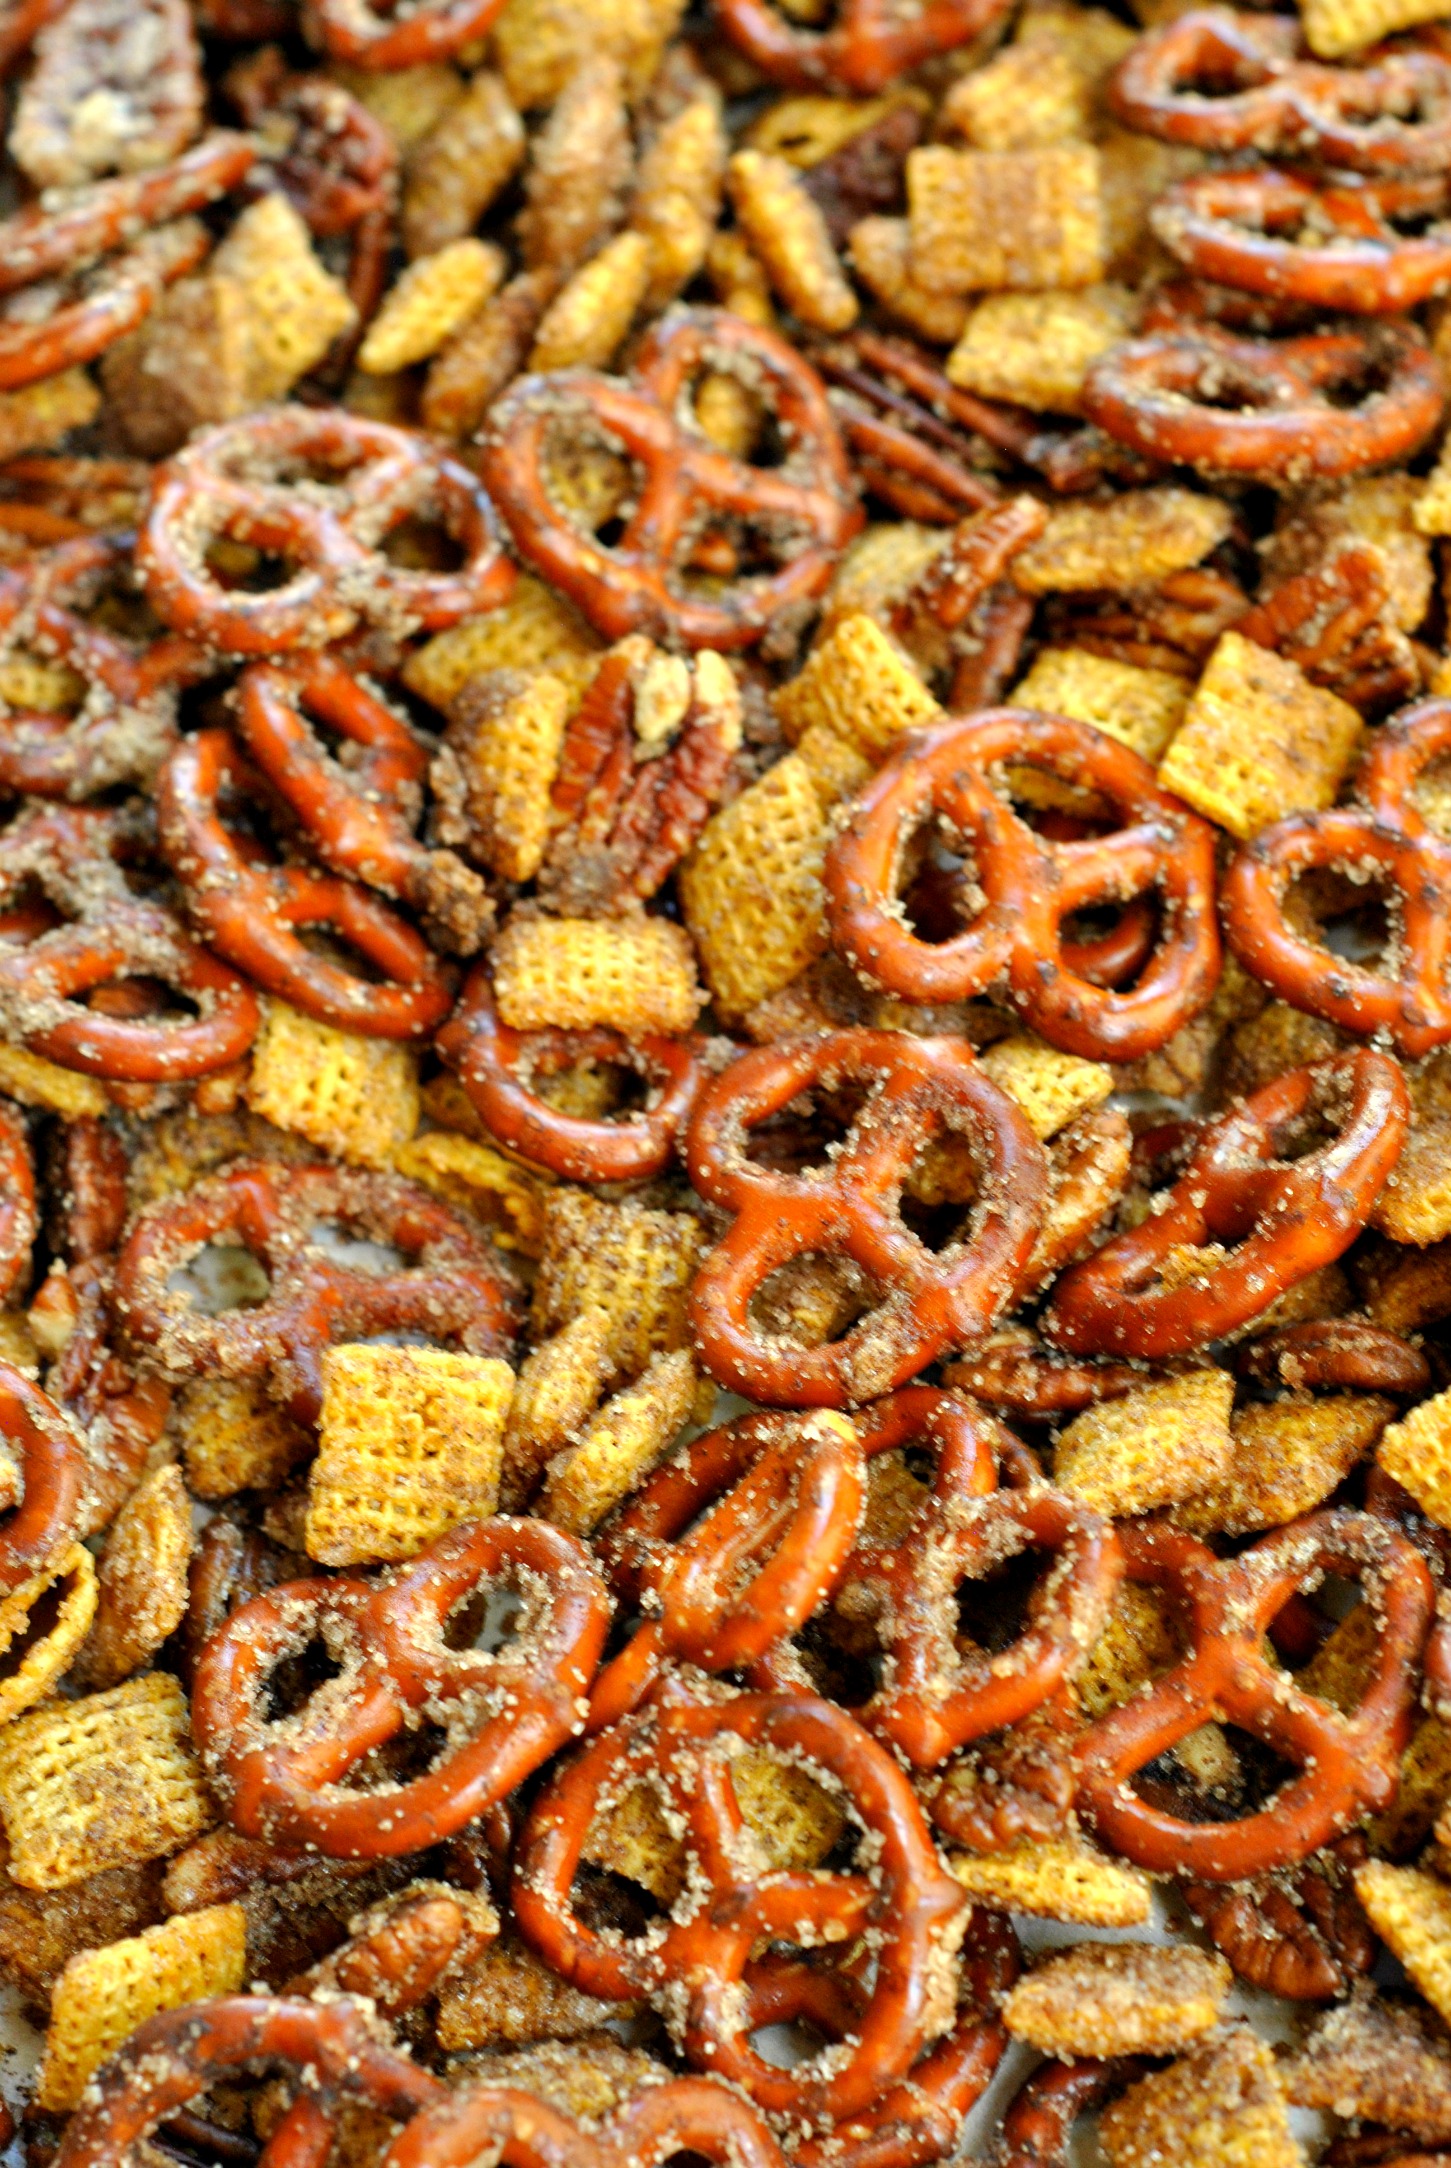 Cinnamon Sugar Snack Mix recipe is perfect for satisfying your snack time cravings! Pretzels, pecans, candy, and cereal coated in cinnamon sugar make this mix so indulgent!